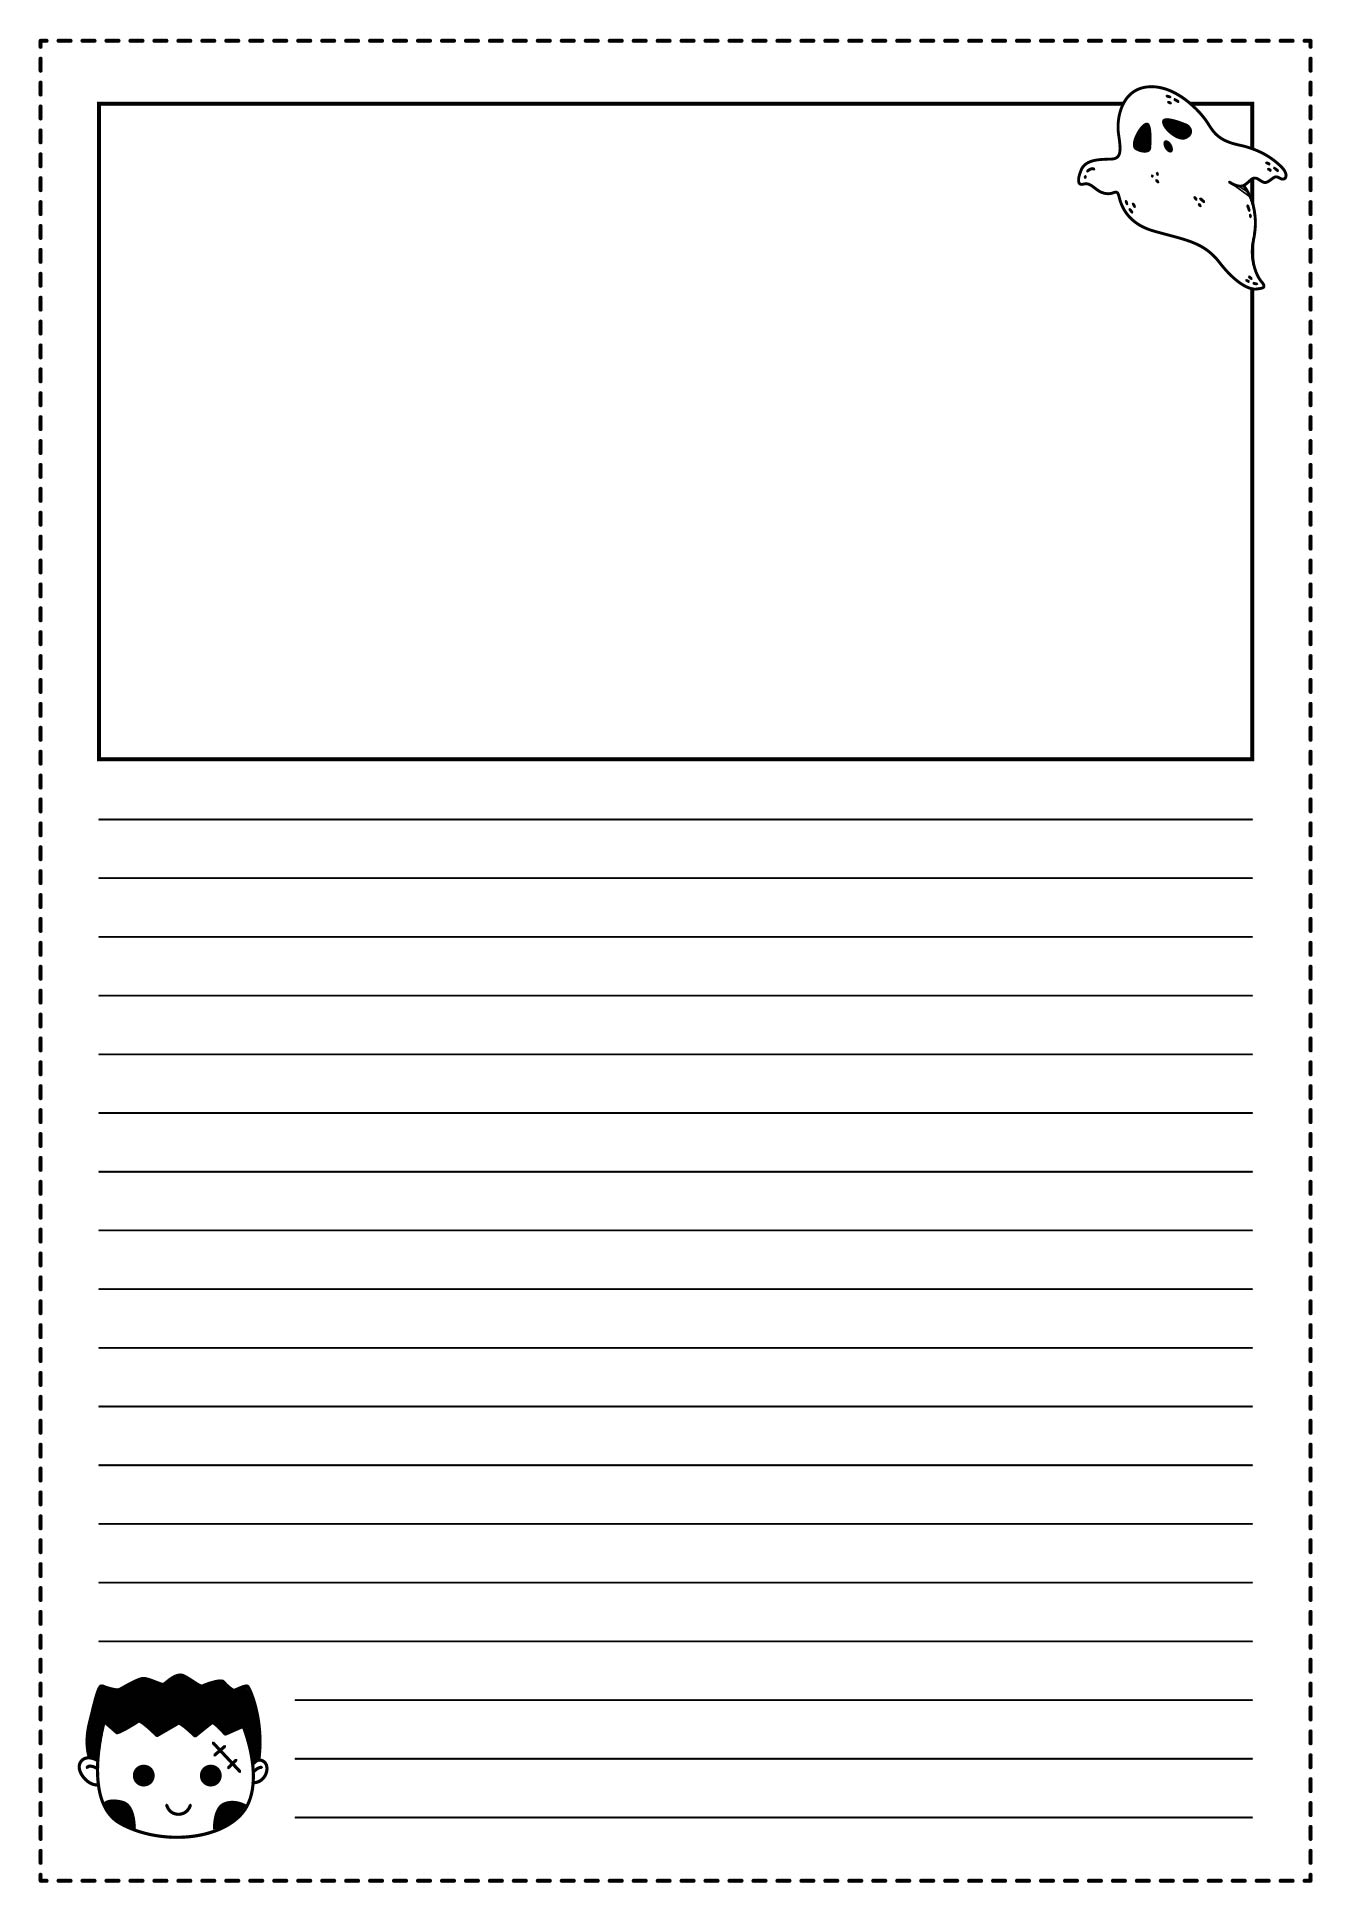 Printable Halloween Primary Lined Writing Paper With Drawing Art Box